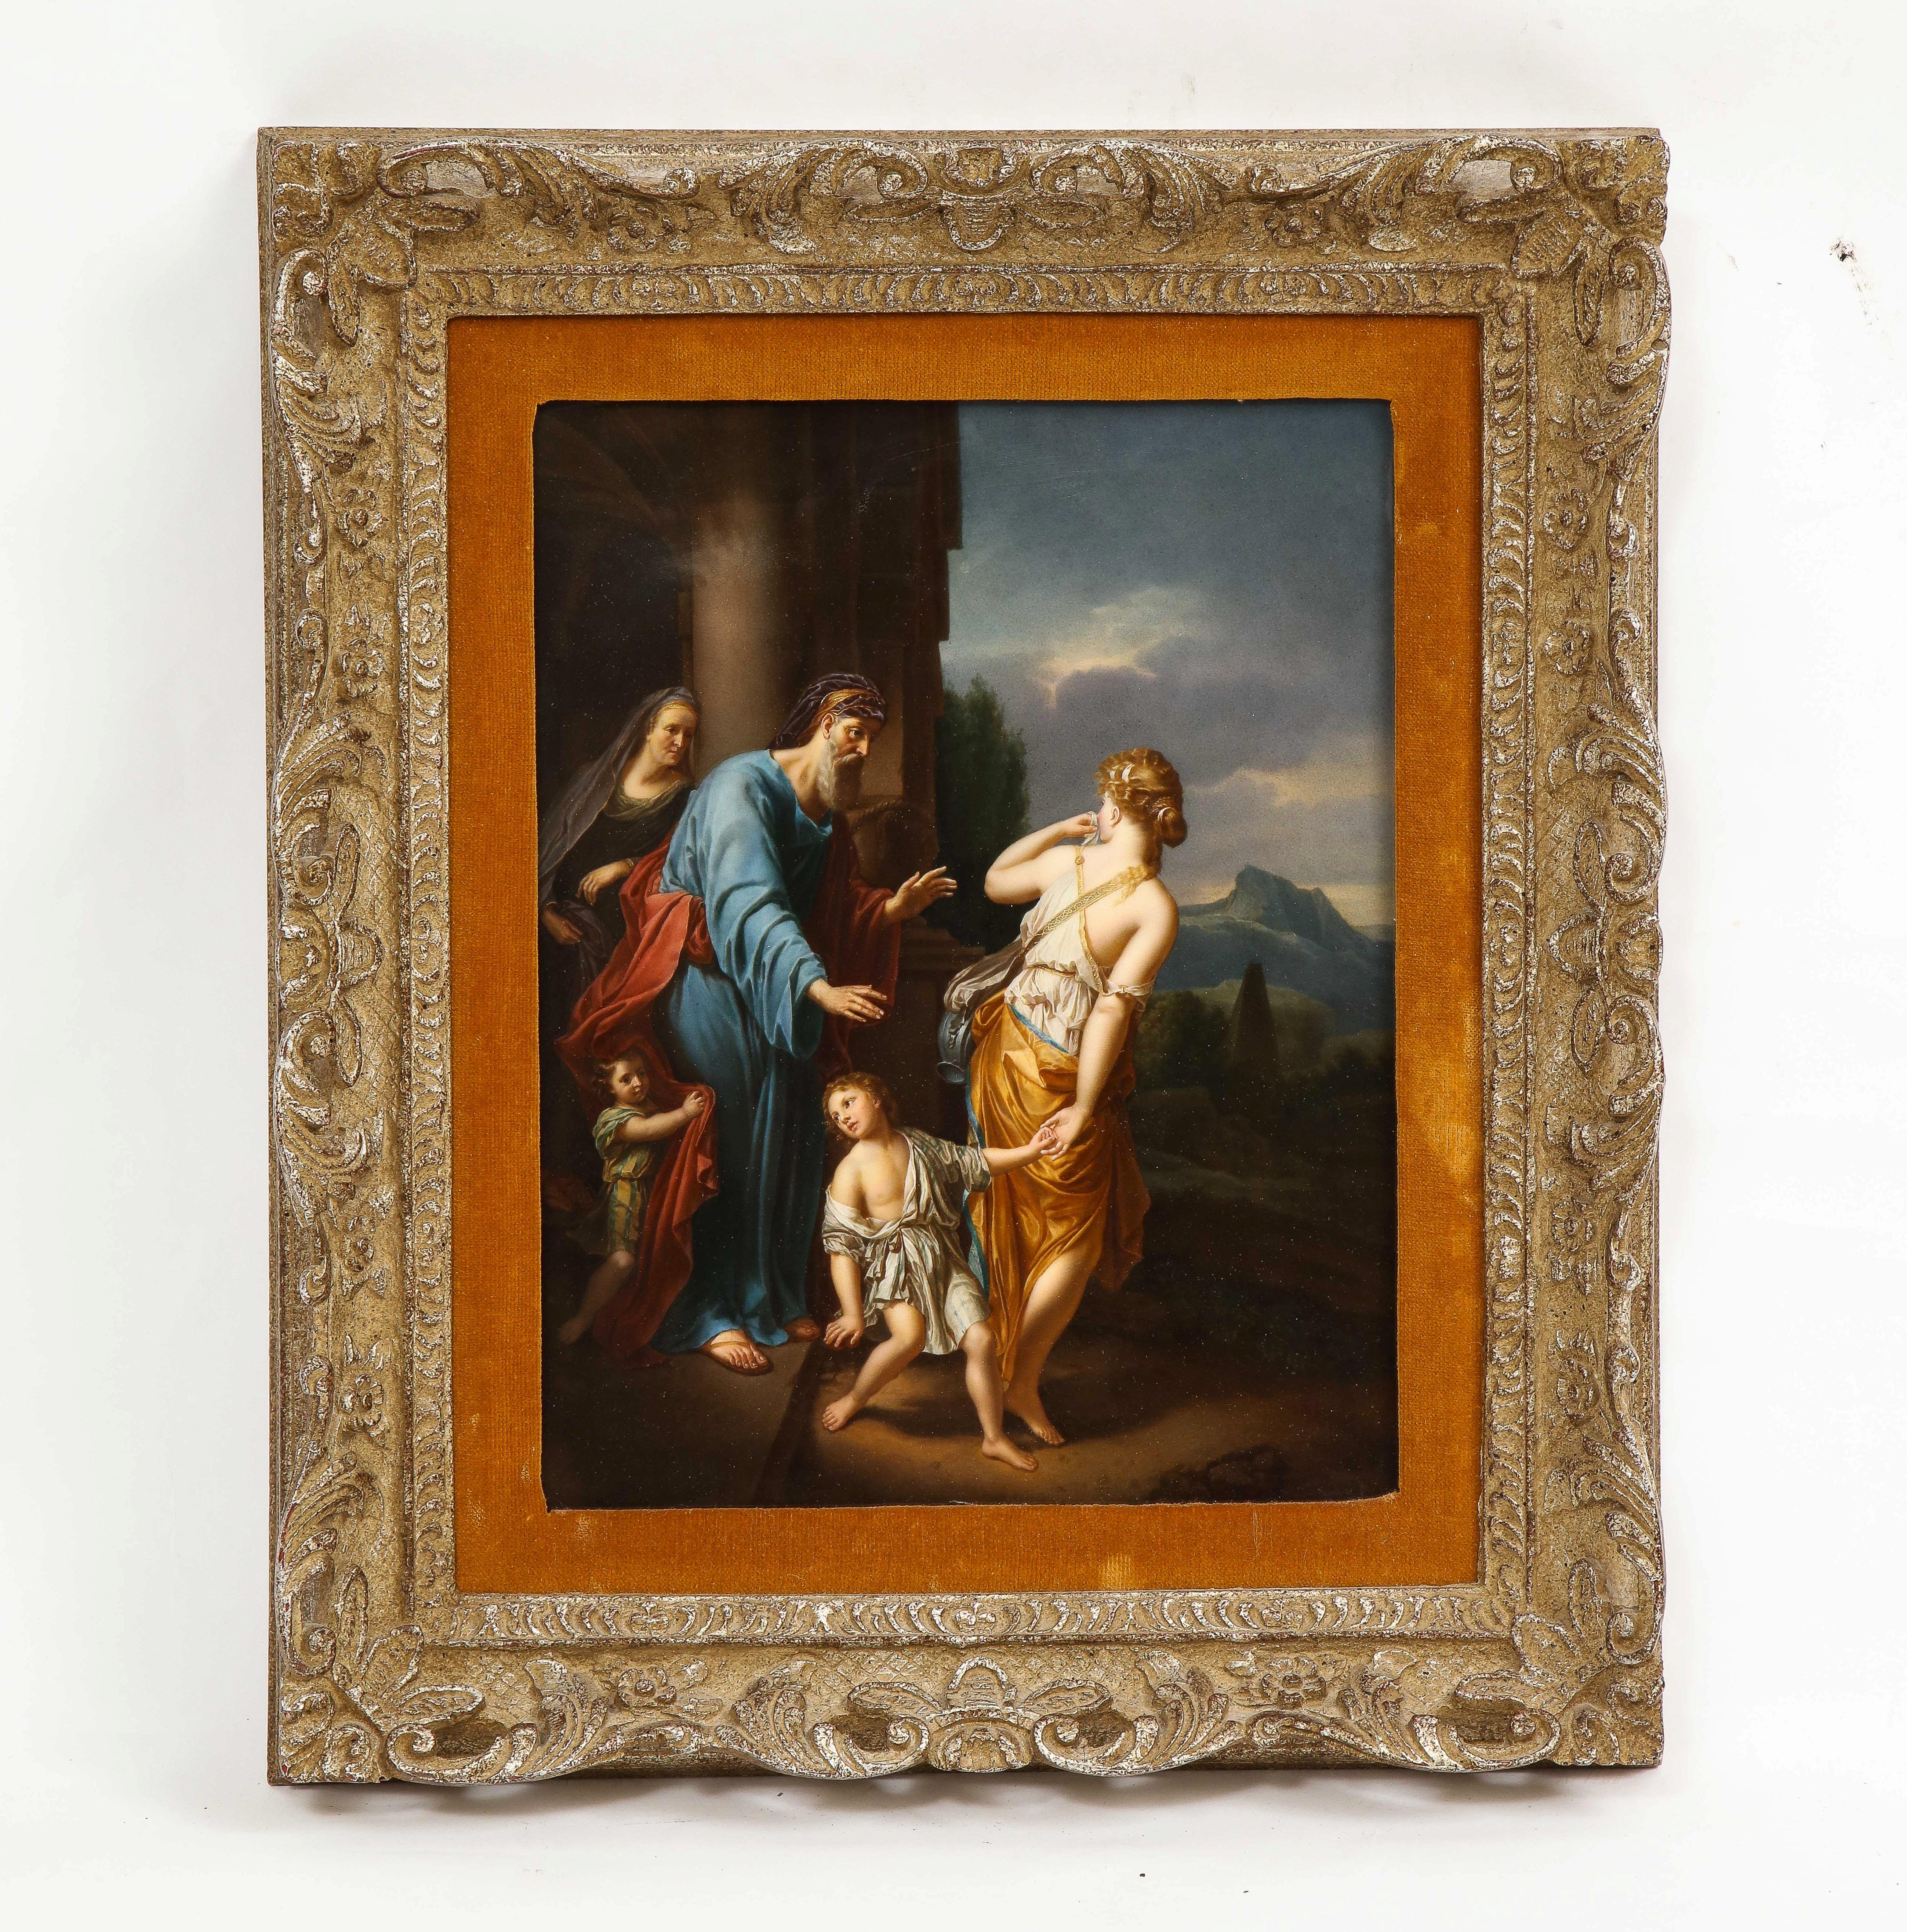 A 19th Century Meissen Porcelain Plaque of 'The Banishment of Ishmael and Hager', in its Original Frame. This fantastic Meissen porcelain plaque depicts the biblical story of Abraham telling Hagar to leave. Abraham is seen with a white beard and